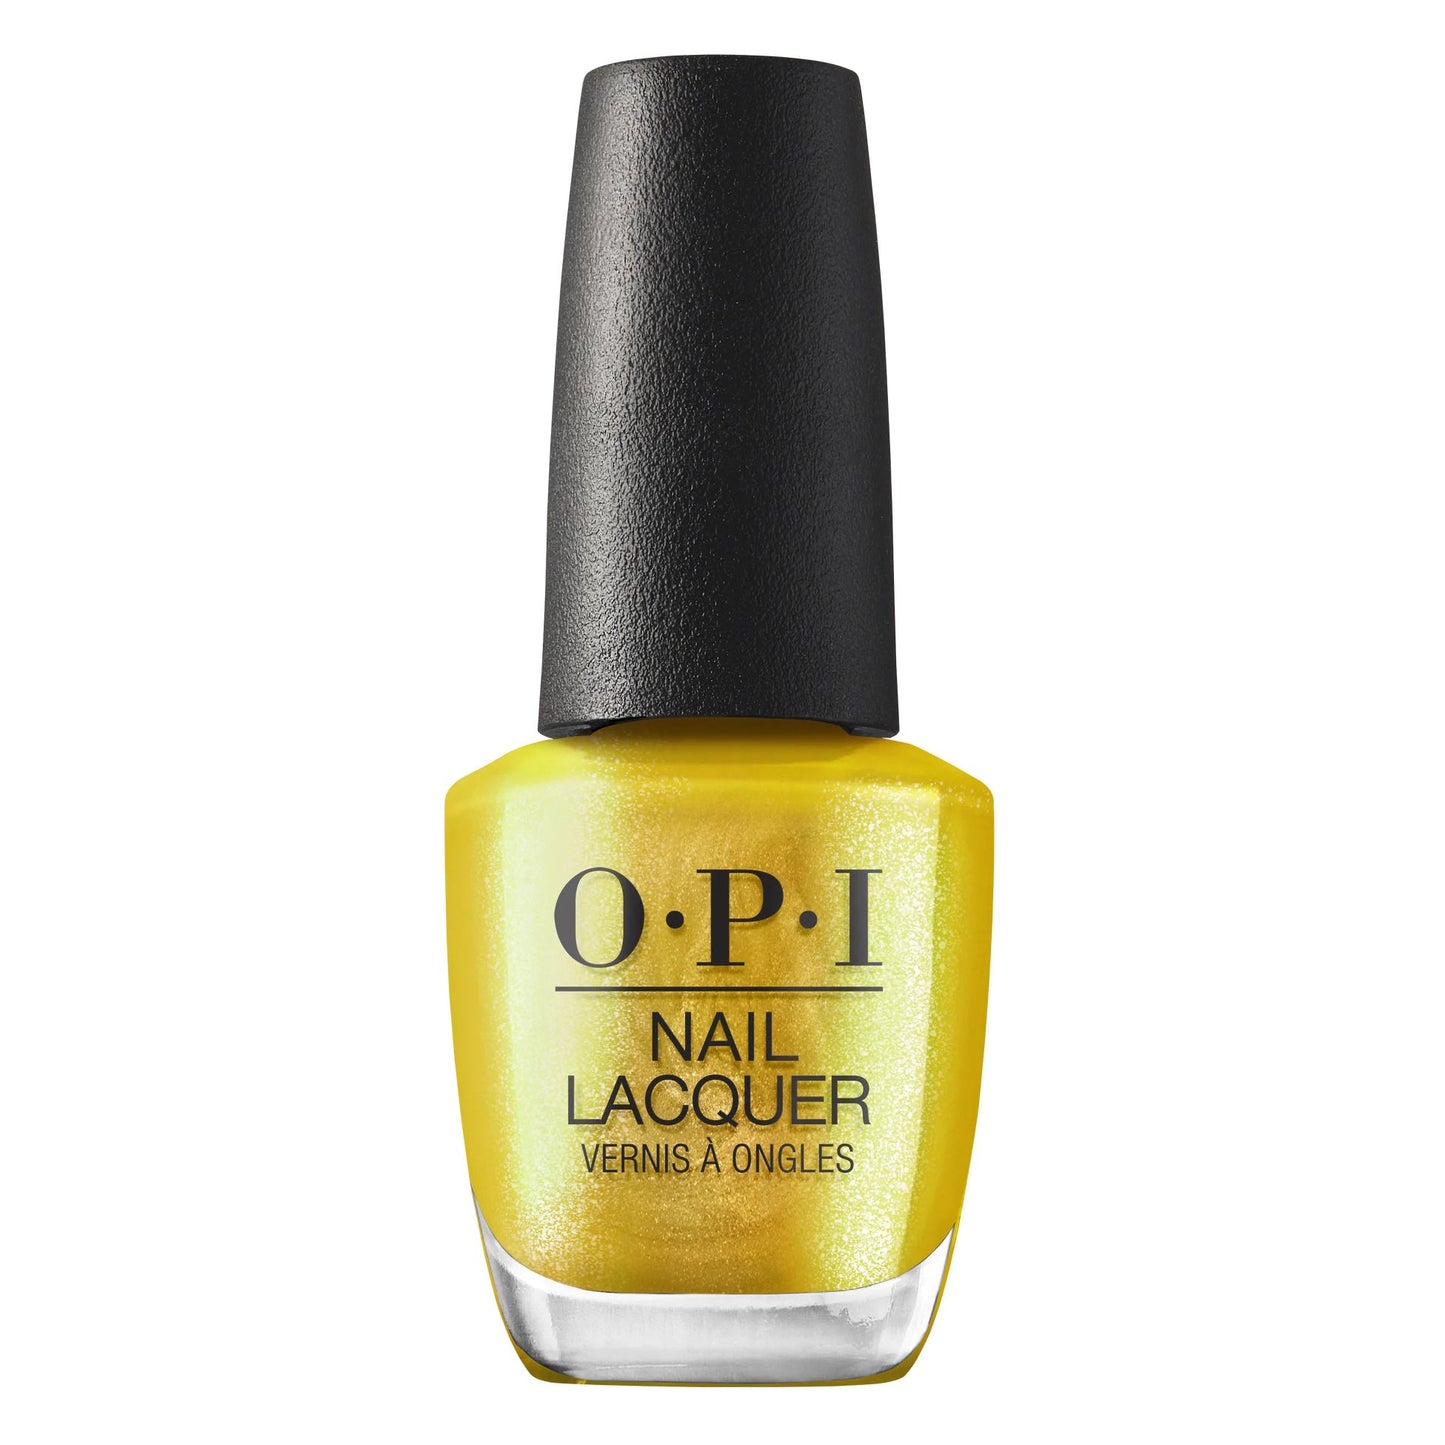 The Leo-nly One | NLH023 | 0.5 fl oz | BIG ZODIAC ENERGY | Nail Lacquer | OPI - SH Salons